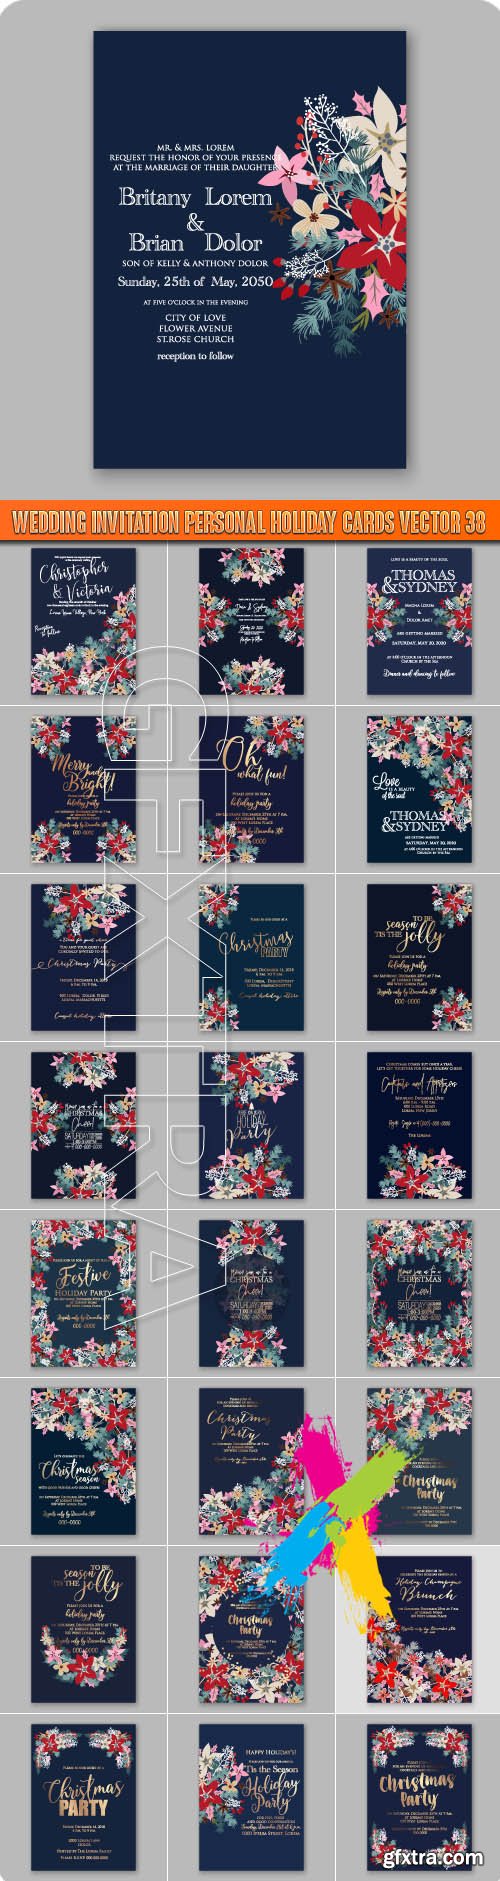 Wedding invitation personal holiday cards vector 38